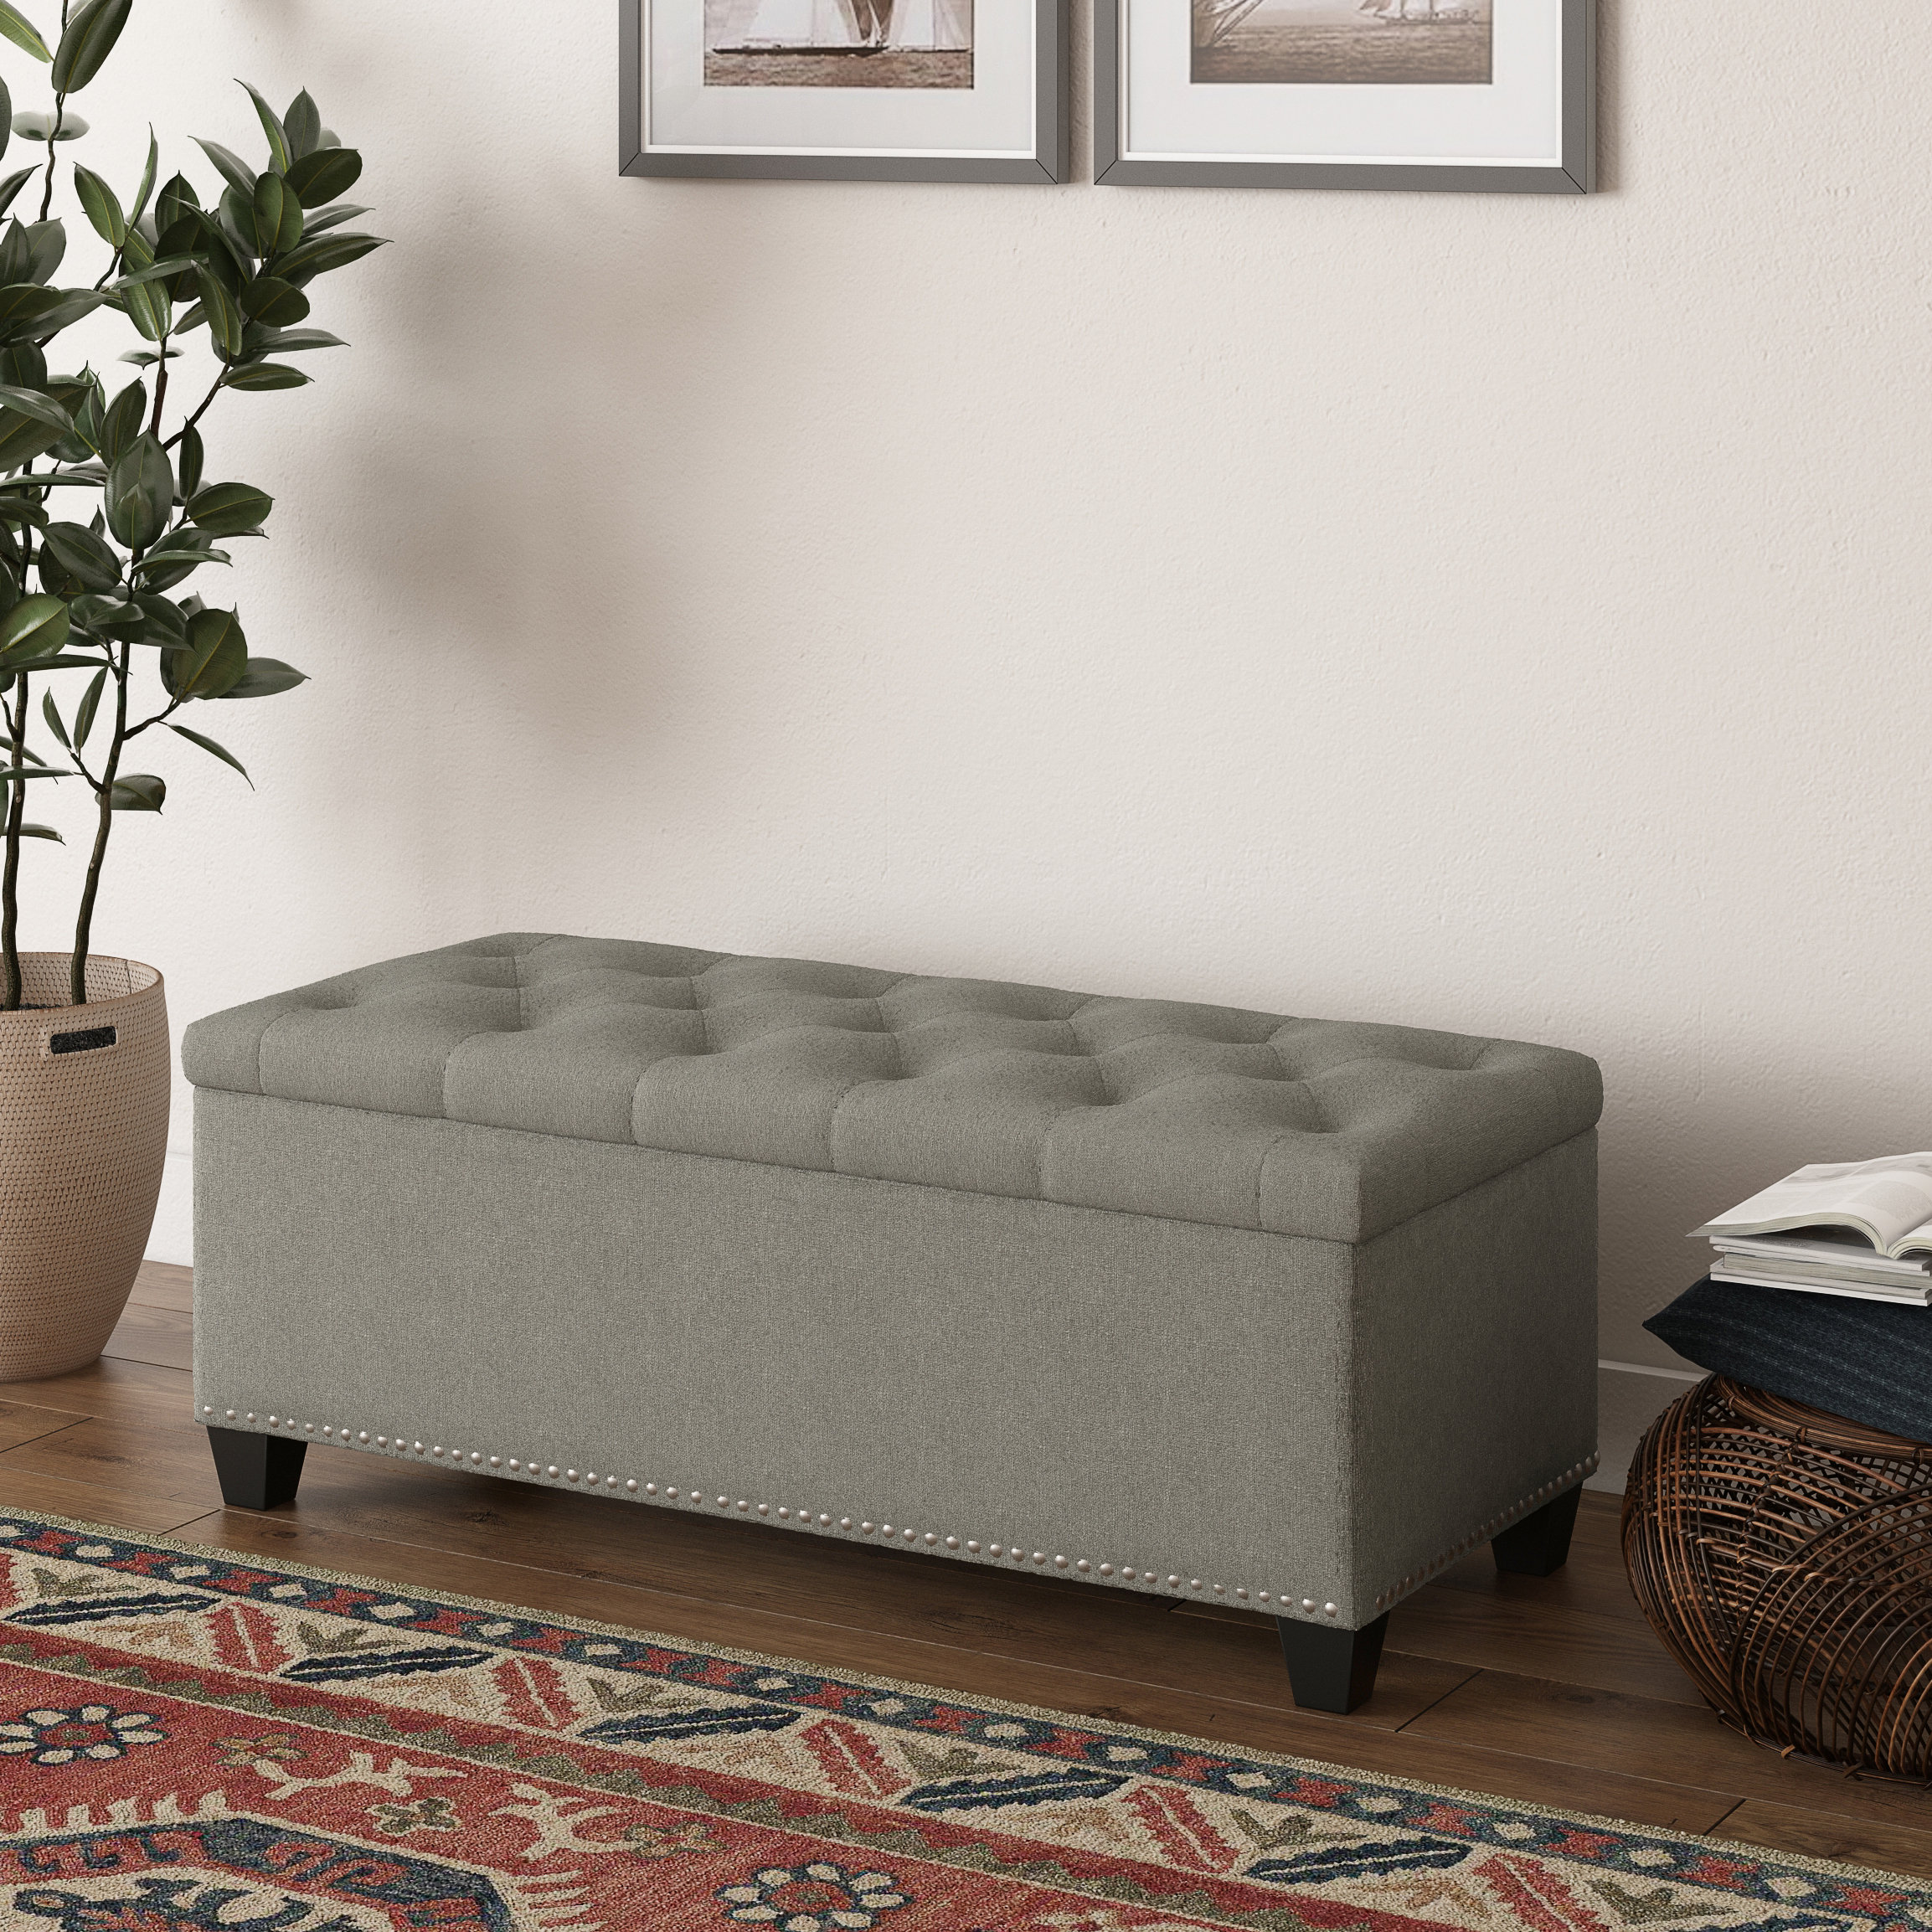 Steubenville 48” Wide Tufted Rectangle Storage Ottoman with Storage